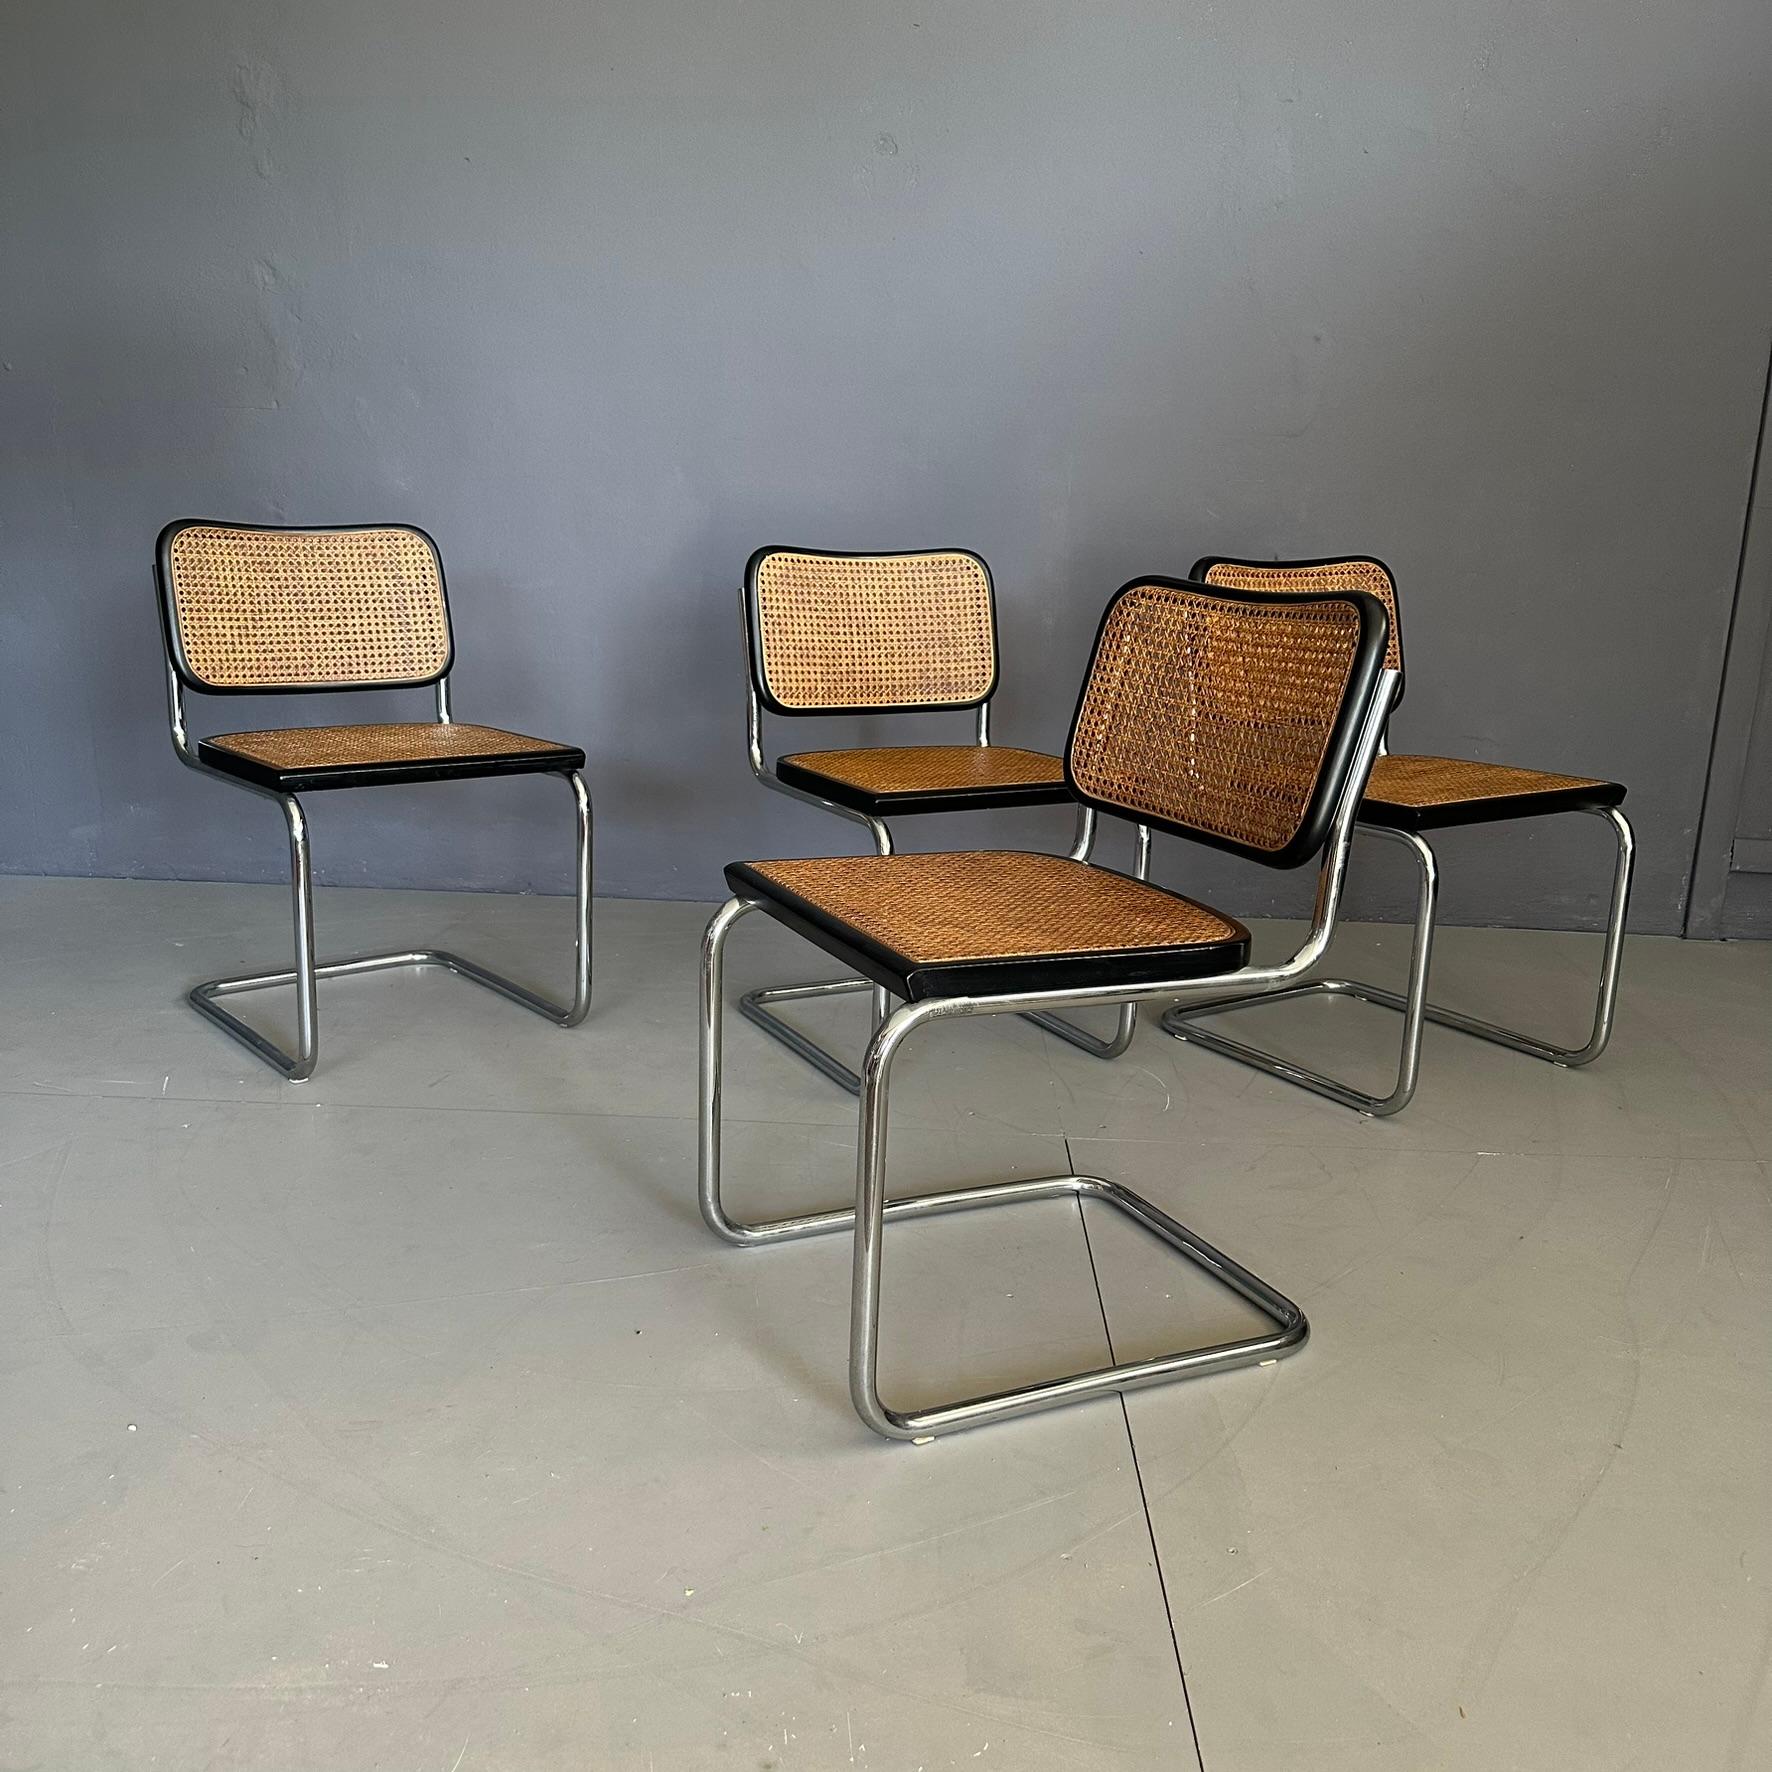 Set of 4 CESCA chairs, model B32, design by Marcel Breuer for Gavina, Italian manufacture from the seventies.

Chromed tubular steel structure, seat and backrest in straw with profiles in black stained beech.
On the back of the seat you can see the